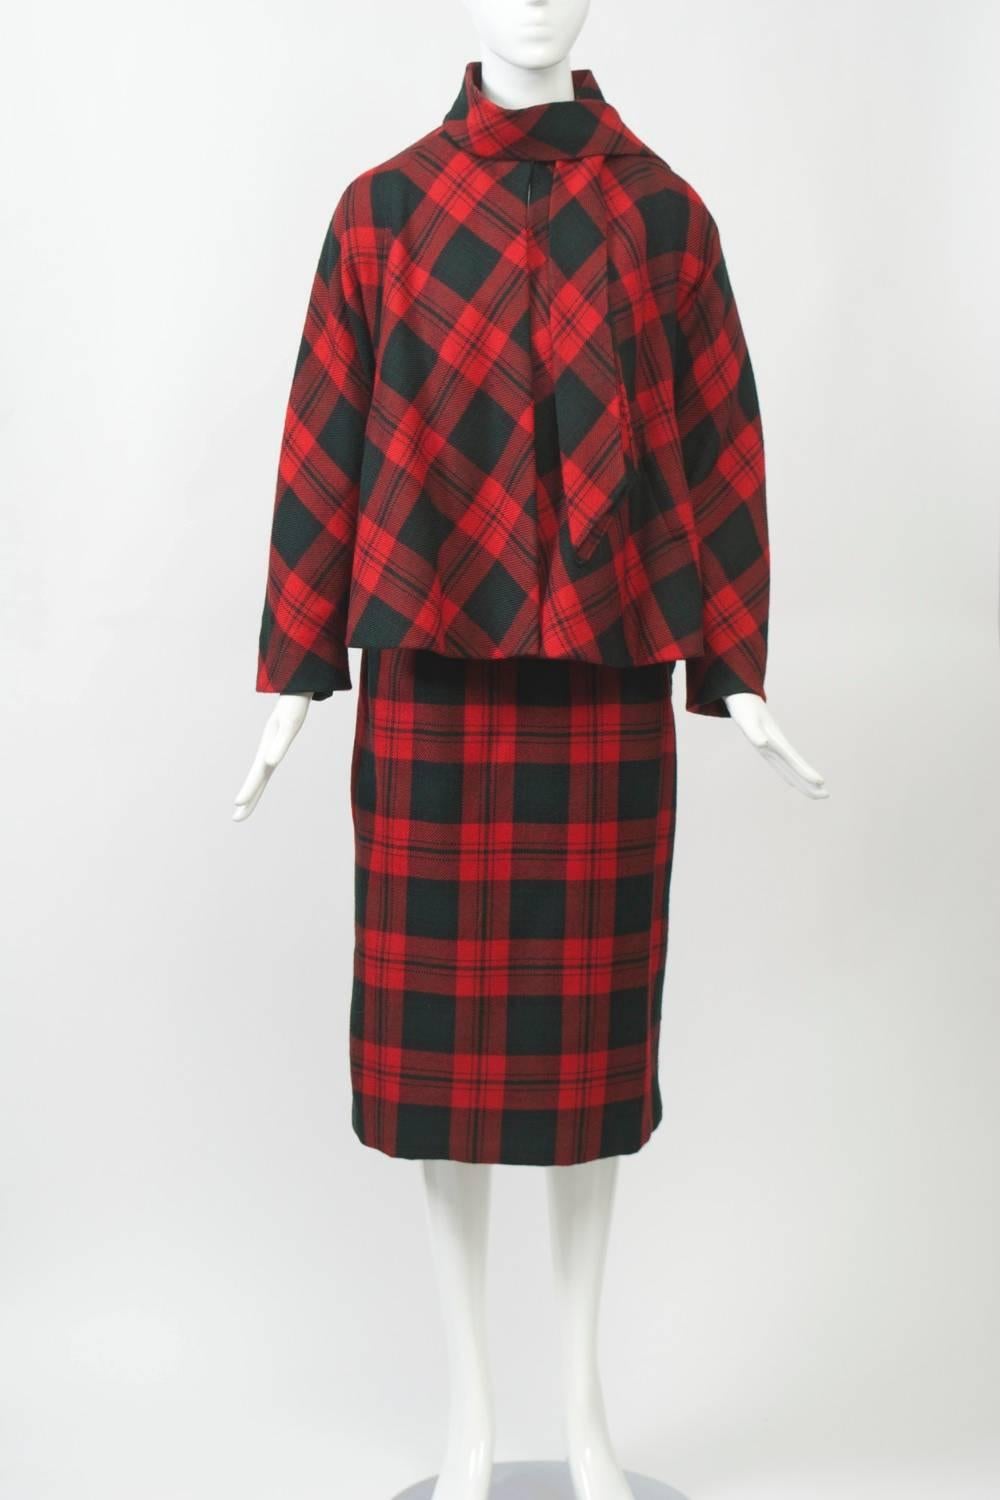 Vintage Pauline Trigere suit in red plaid wool dated 1962. The swing-style jacket has dolman sleeves and a tie collar and tops a slim skirt. Underneath is a dark green knit surplice top, which matches the lining of the jacket. Taped label from Saks